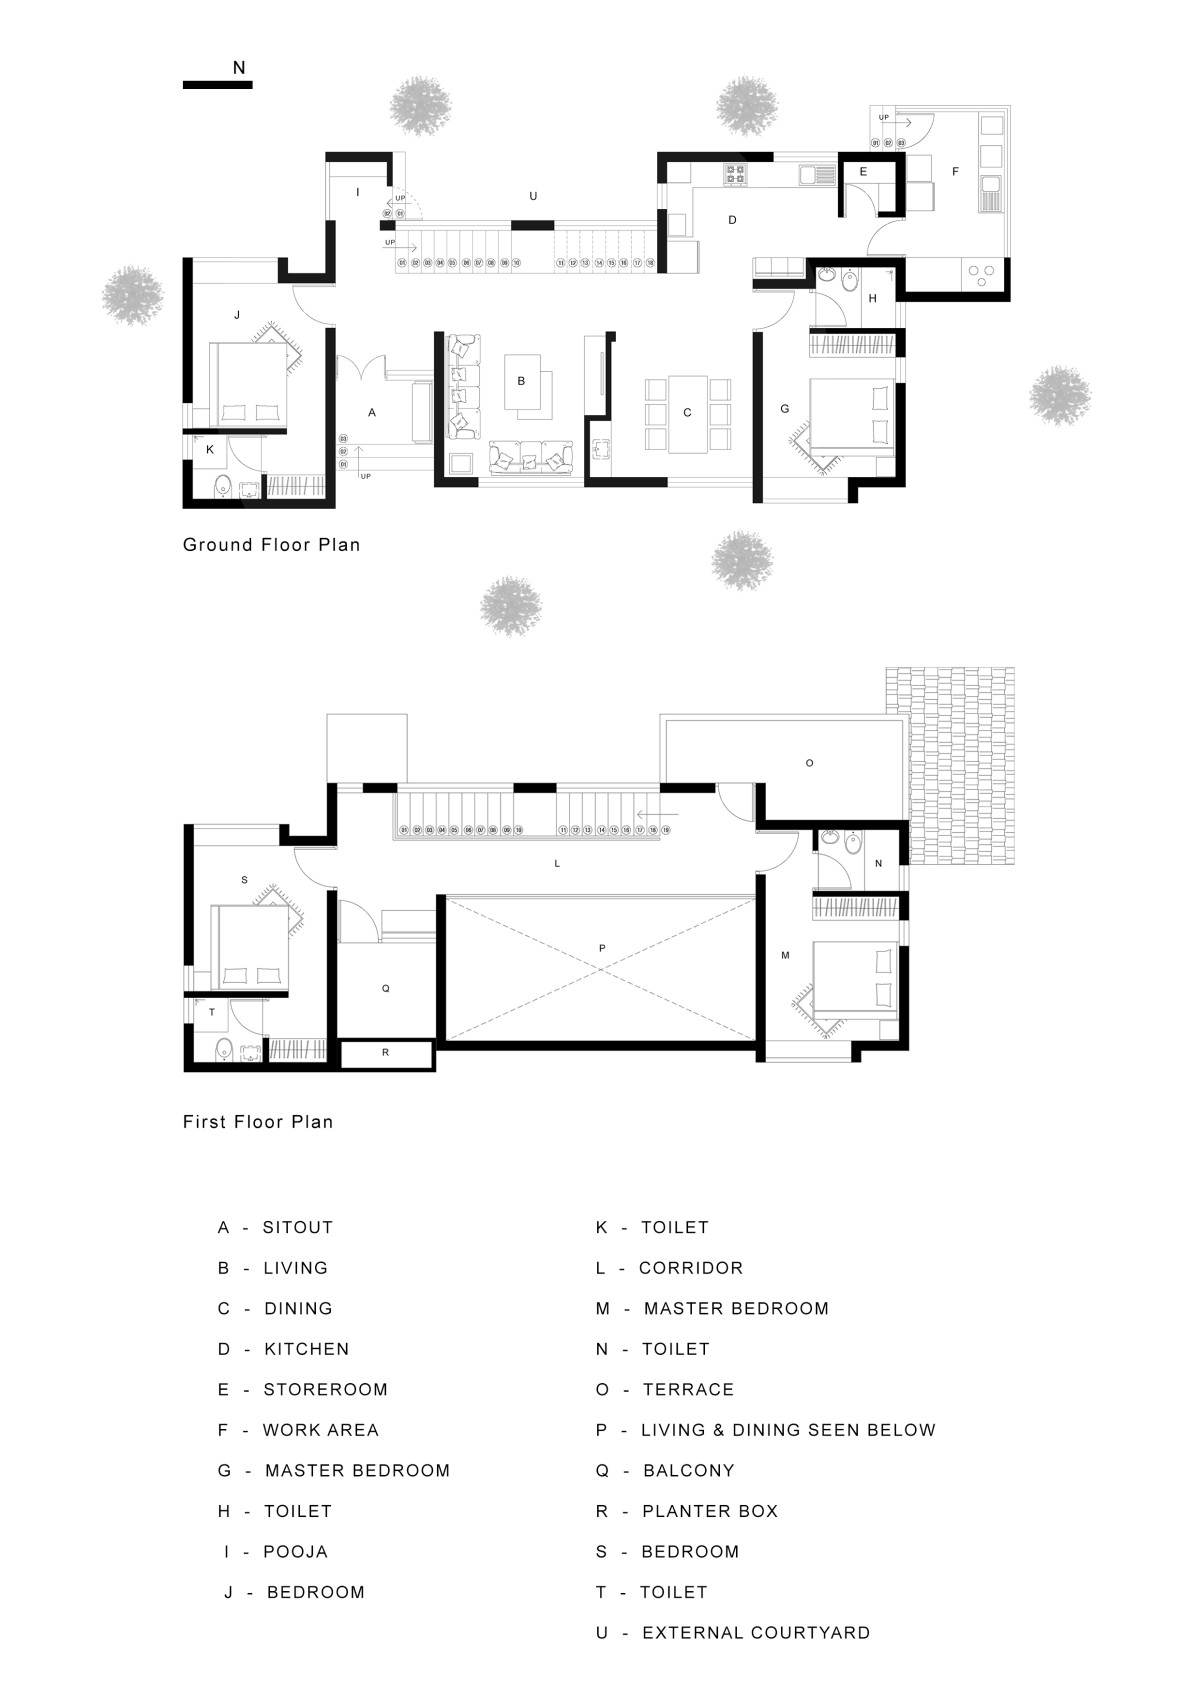 Floor Plans of The 100 by Nestcraft Architecture